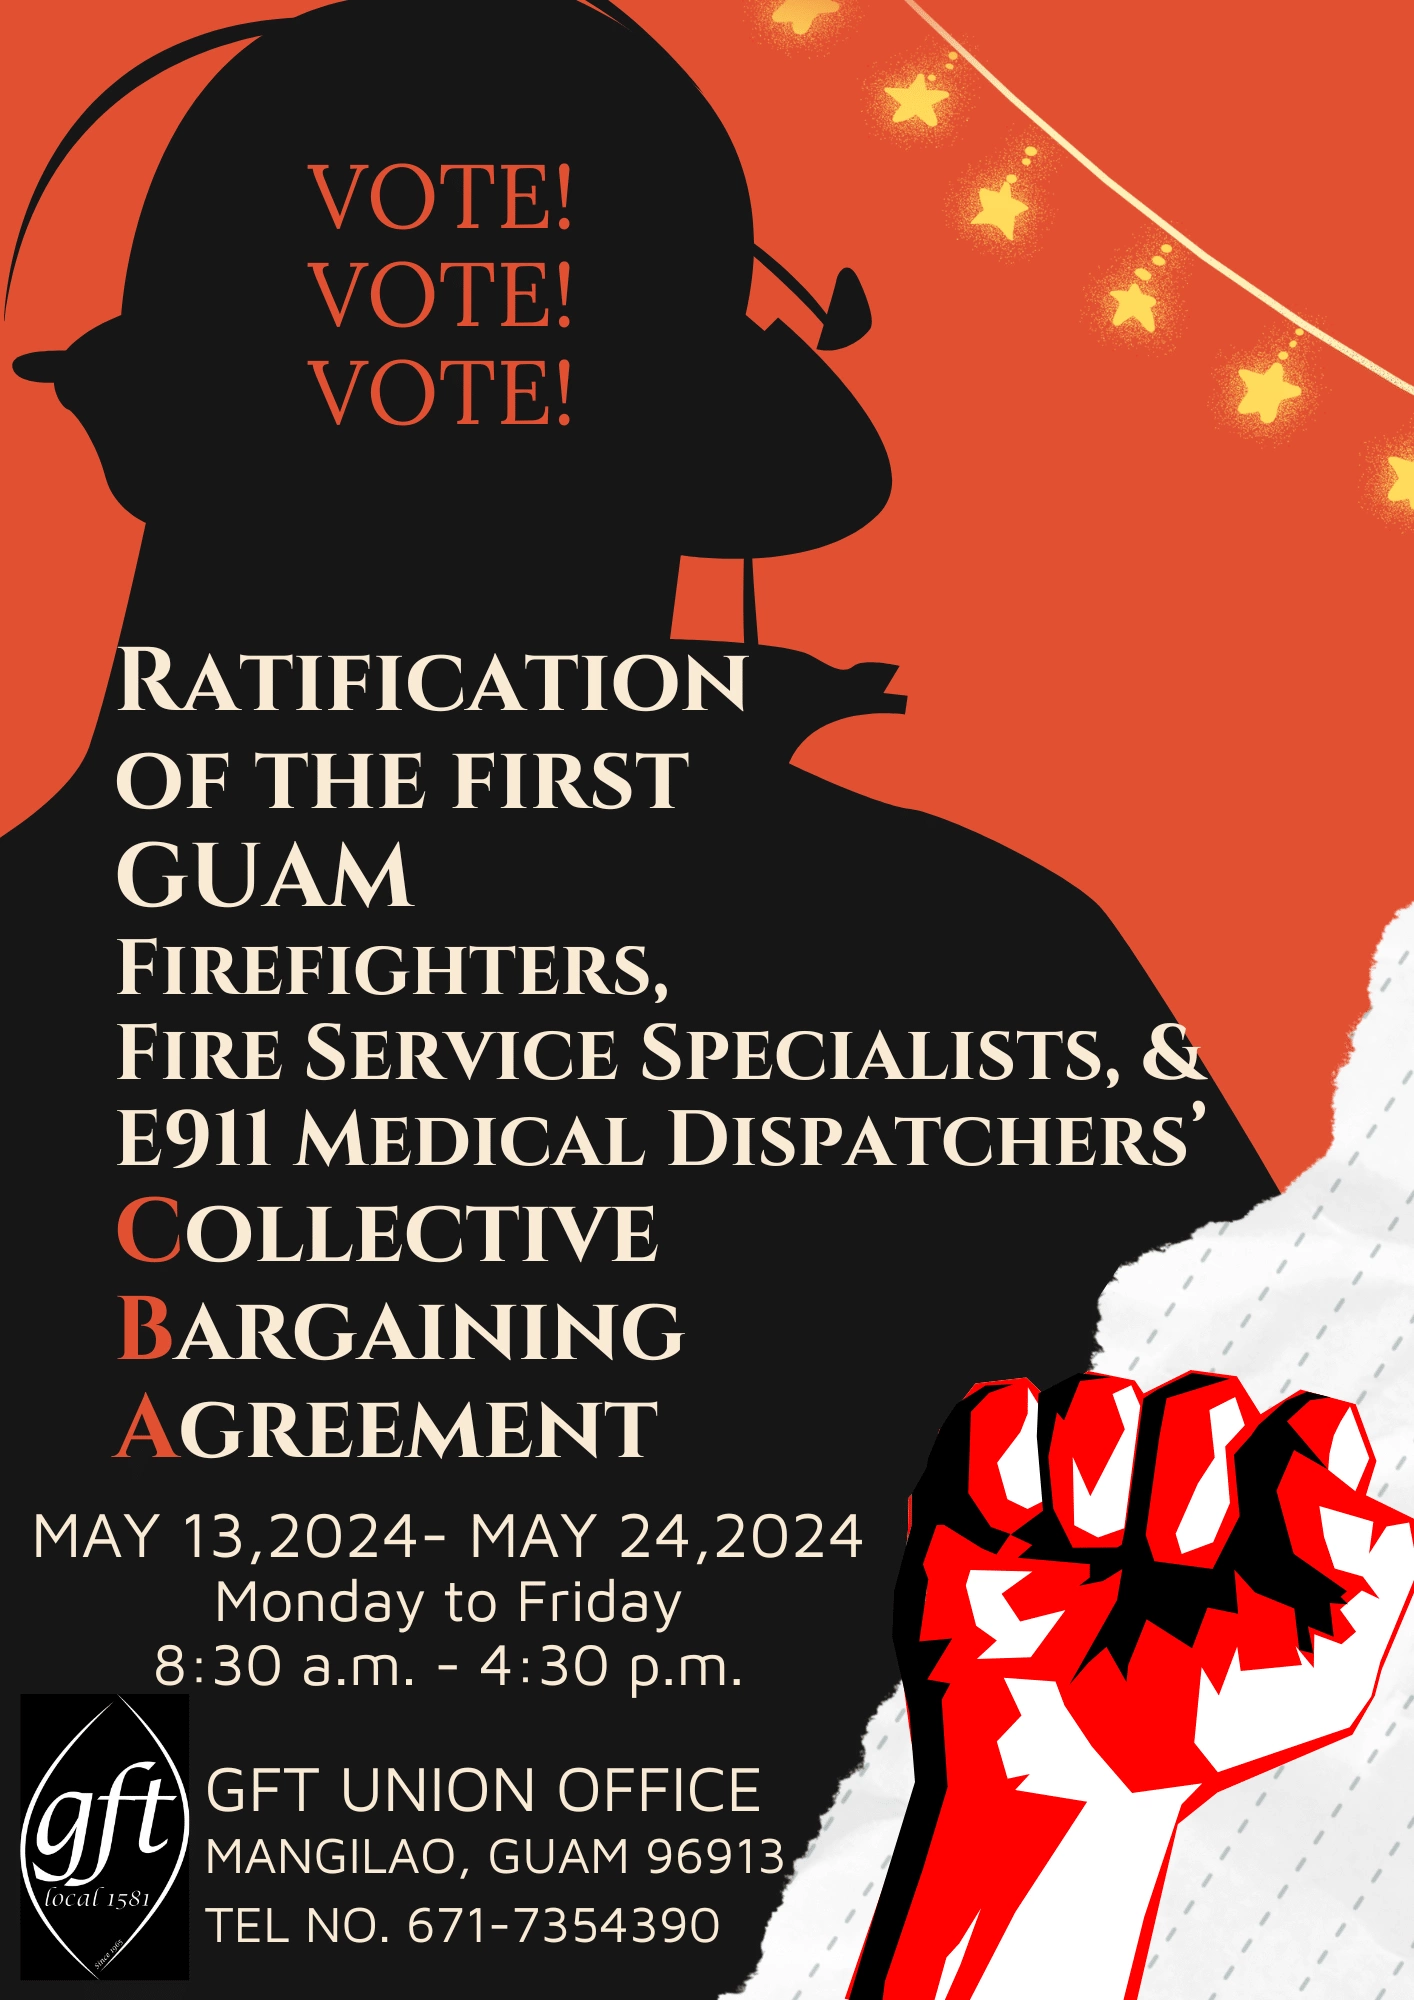 A photograph featuring the silhouette of a firefighter to inspire people to vote for ratification.